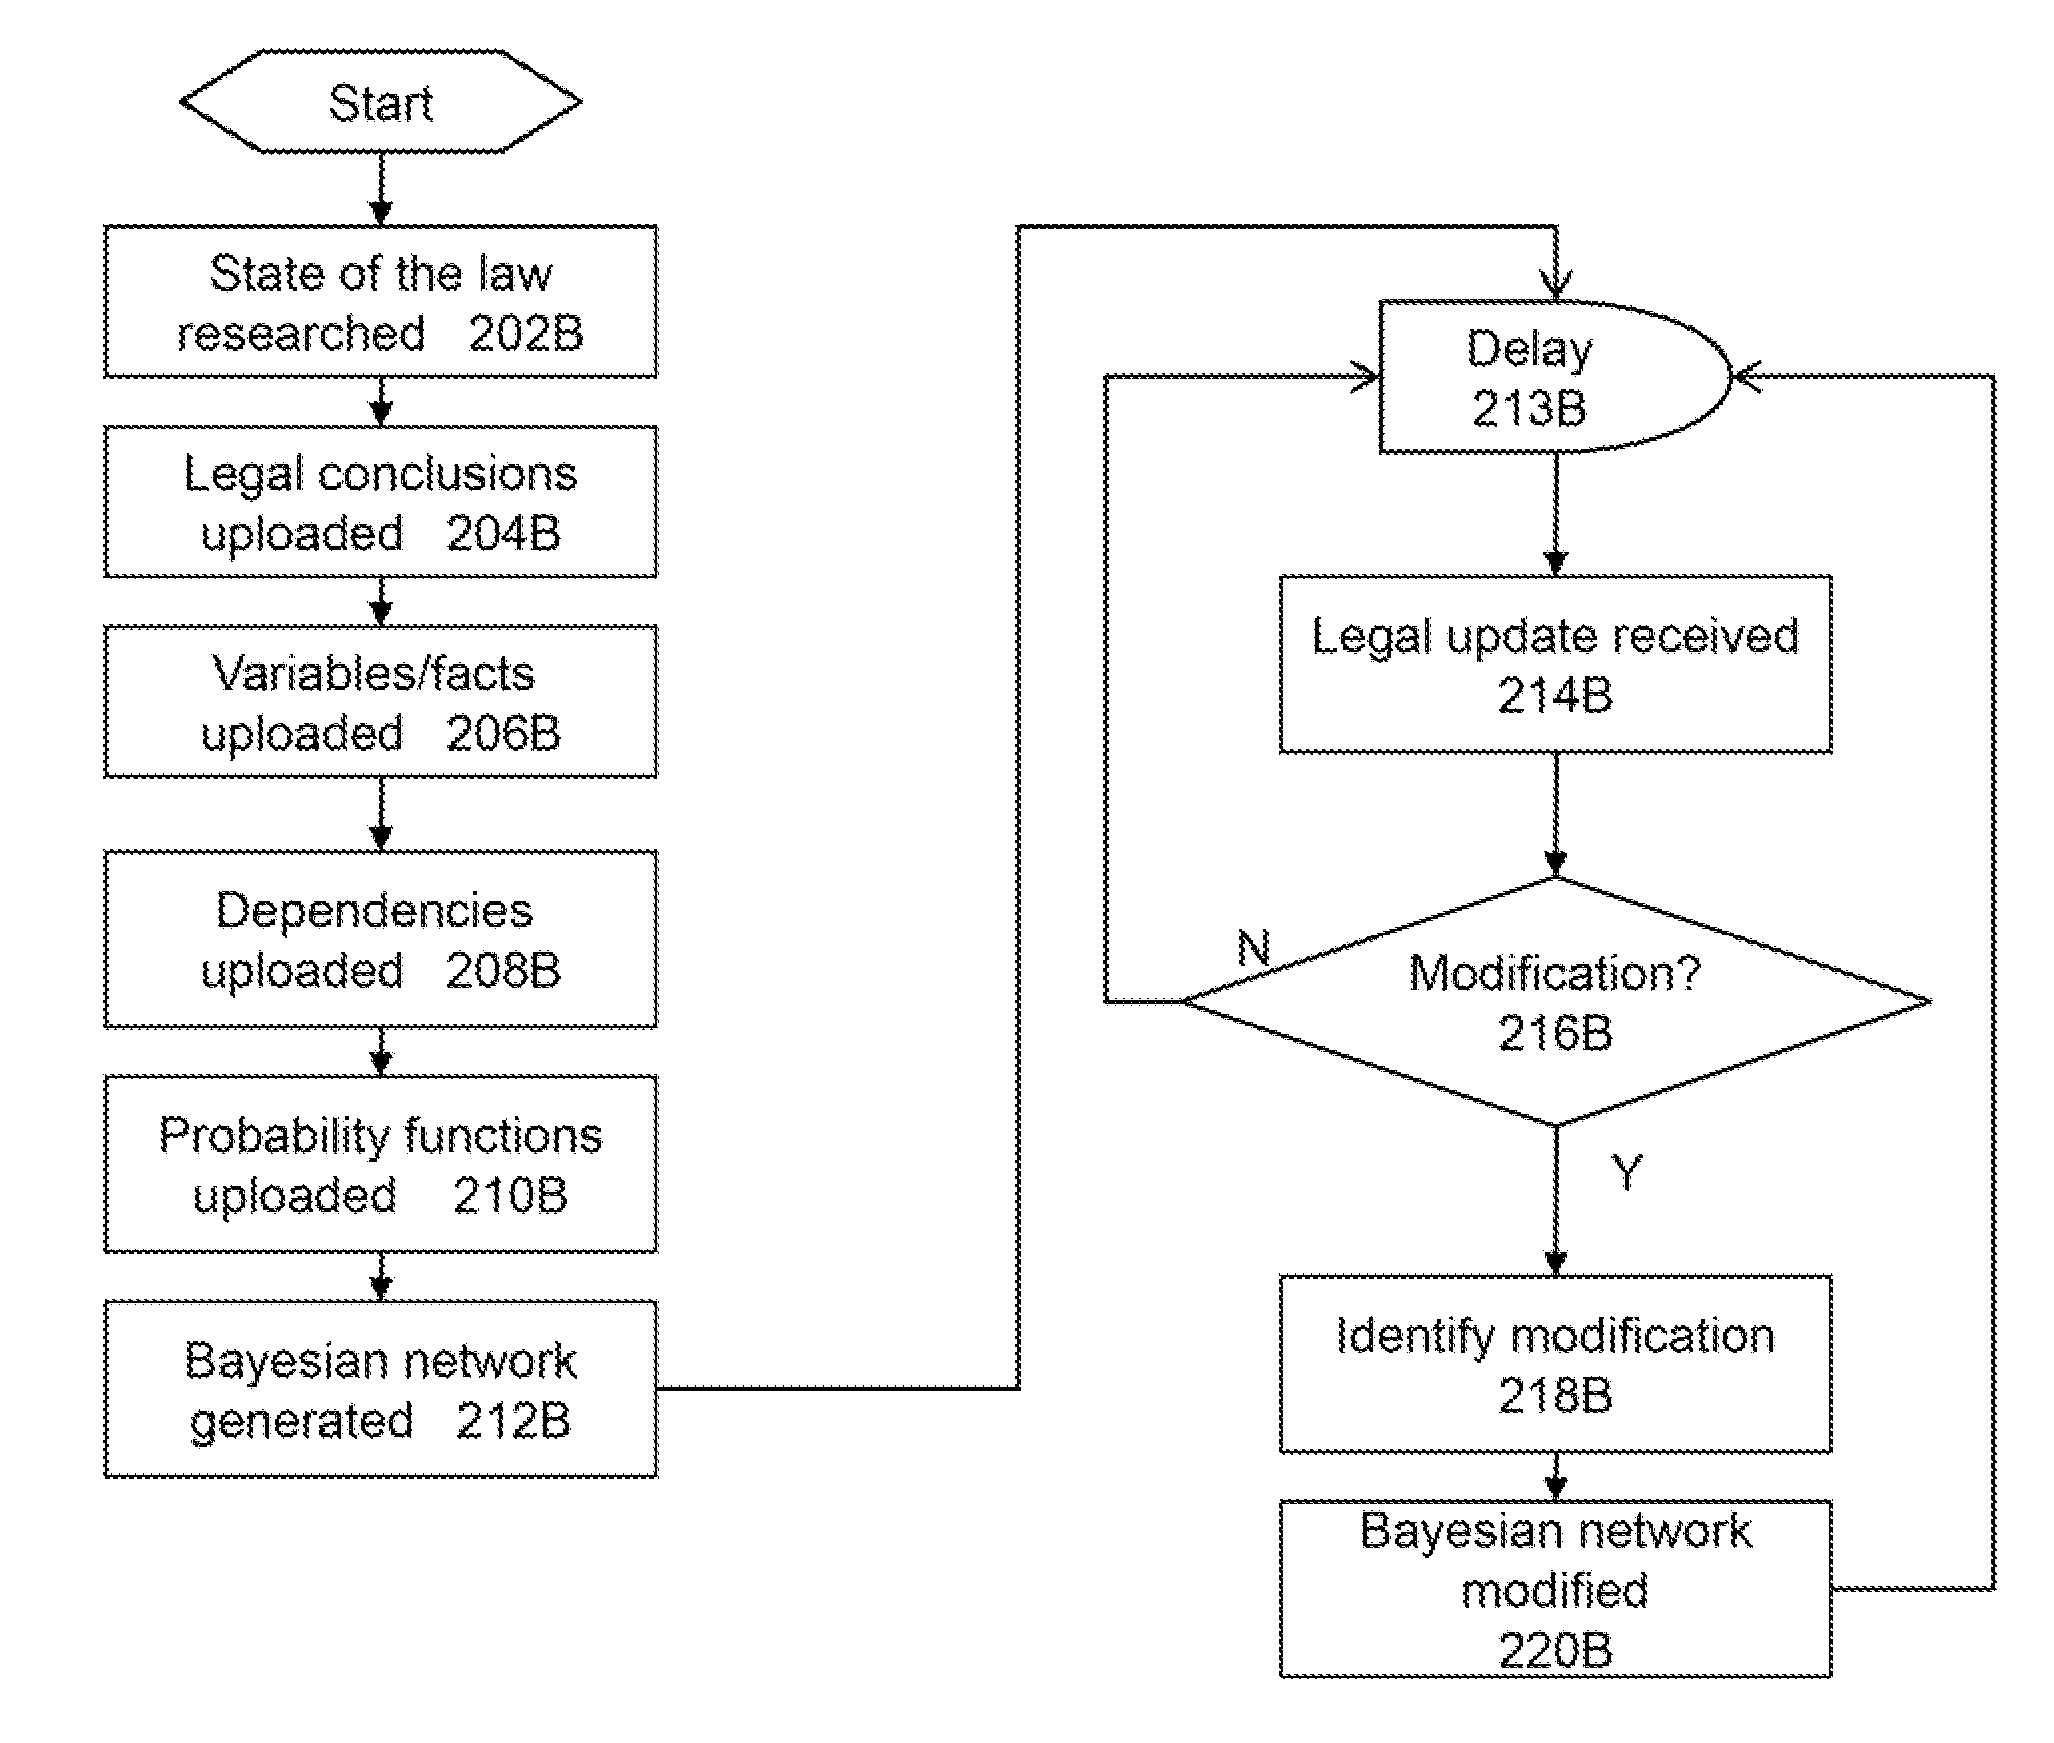 Automated Legal Evaluation Using a Decision Tree over a Communications Network